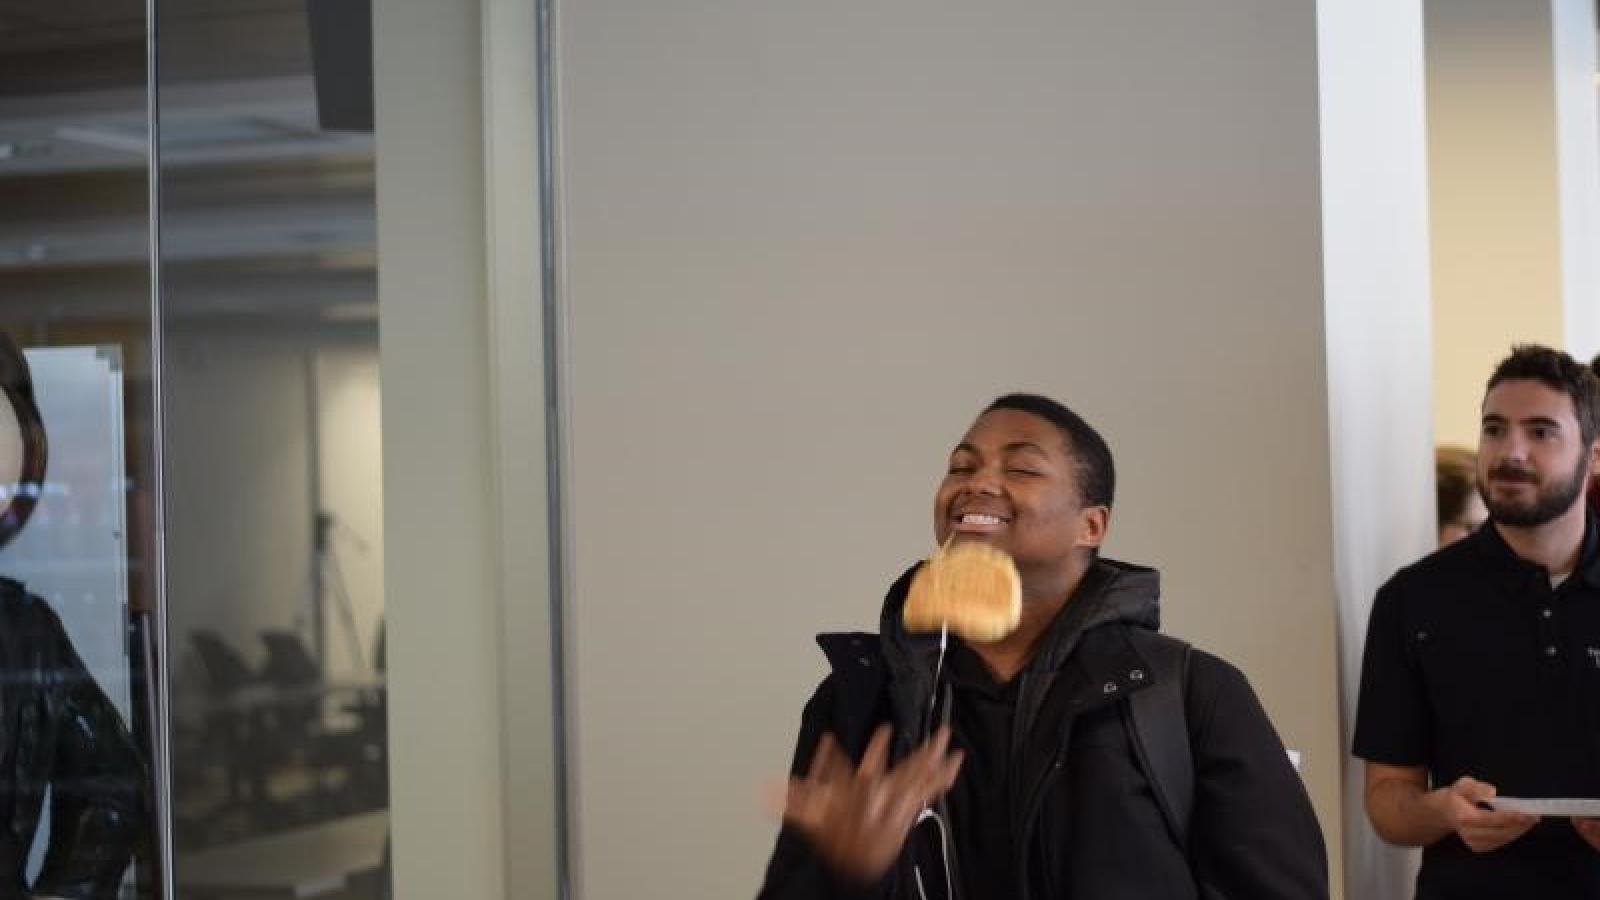 Neuroscience Student Catching Pancake With Face